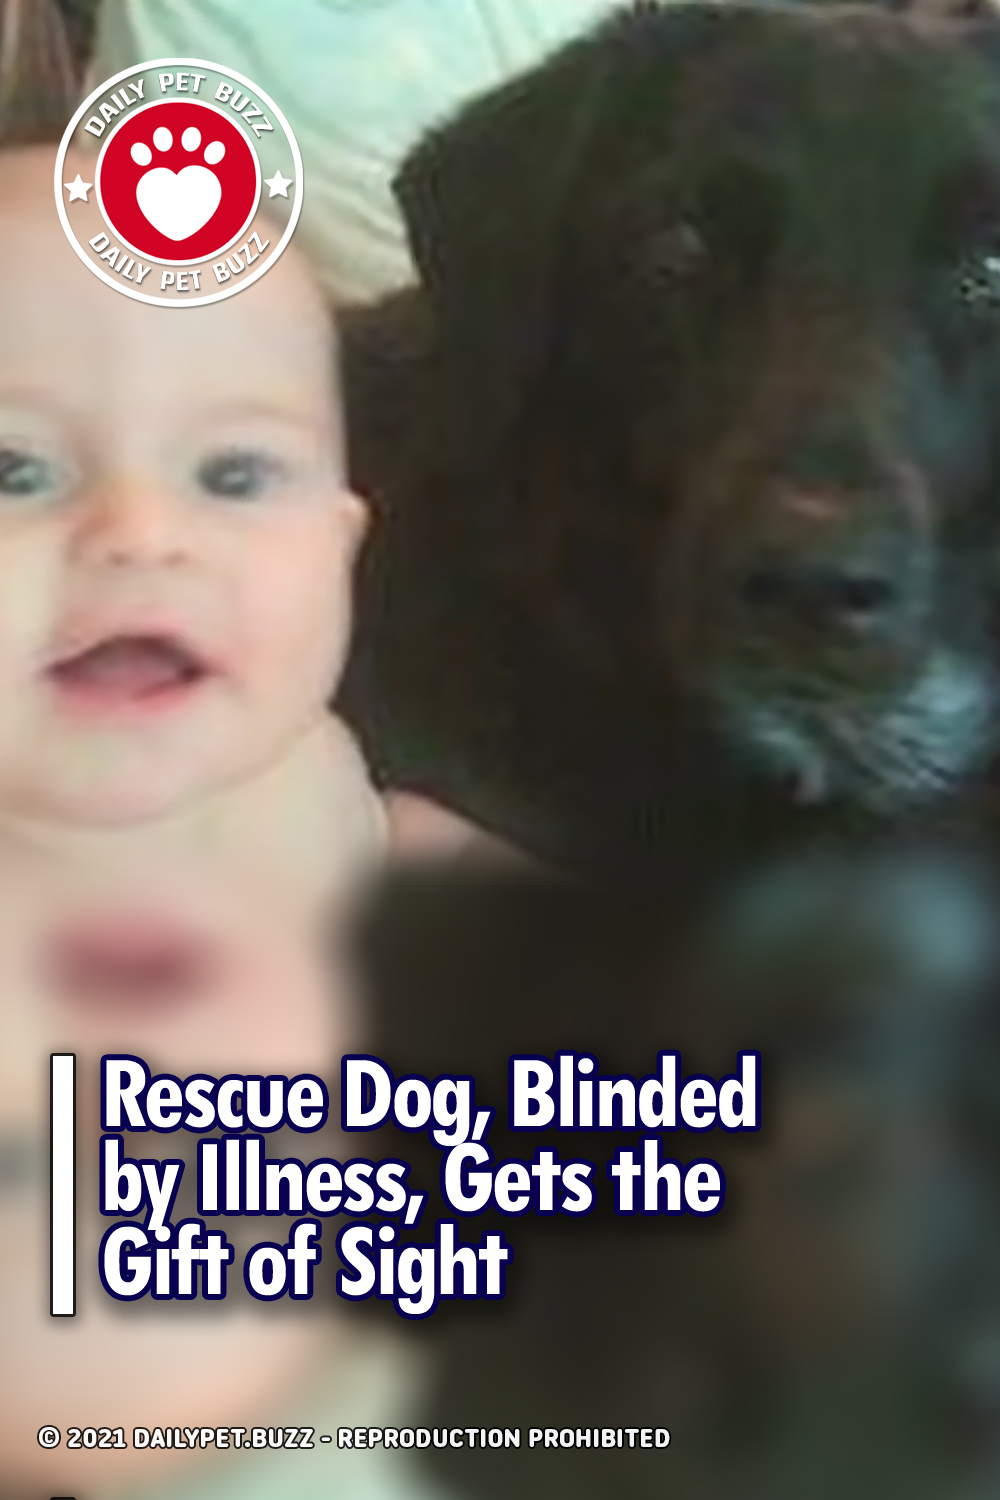 Rescue Dog, Blinded by Illness, Gets the Gift of Sight